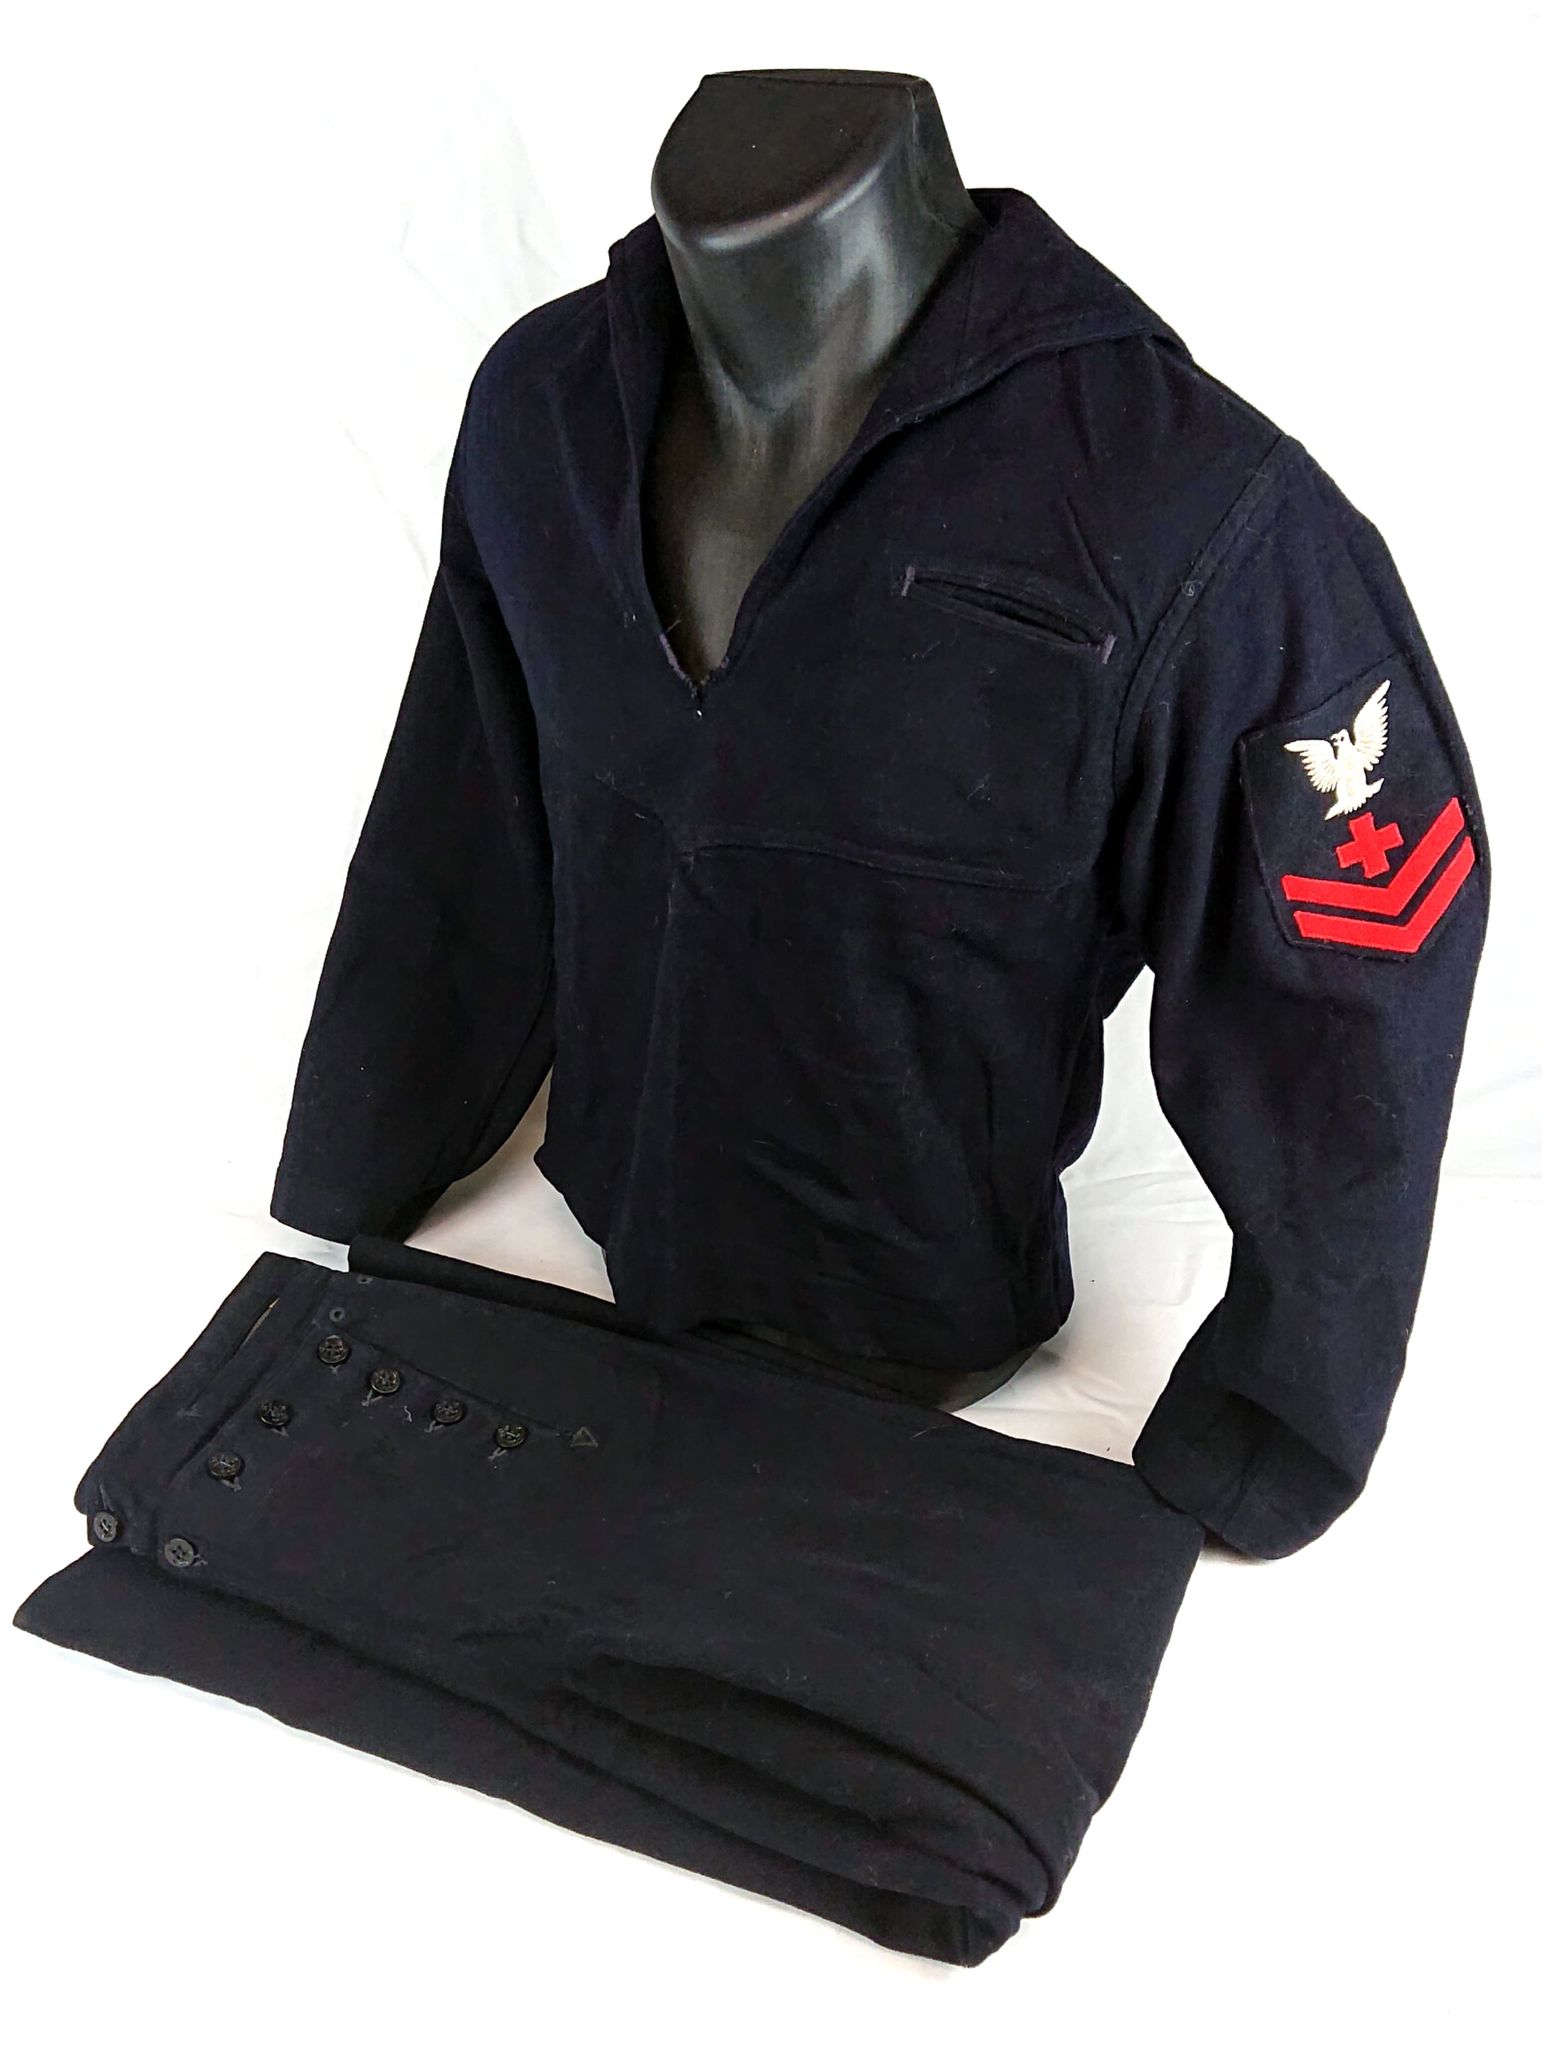 militaria : Tenue infirmier 2nd classe marine US / US Navy 2nd class medic outfit